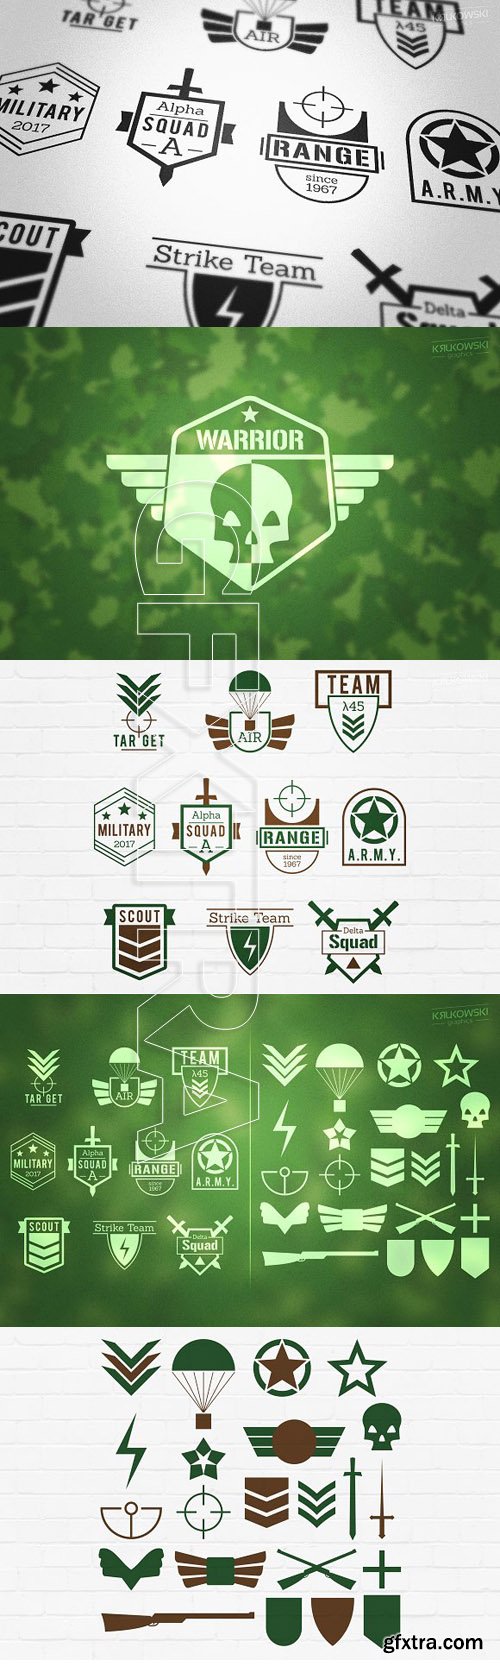 CM Military Army Style Badges Logos 1145920